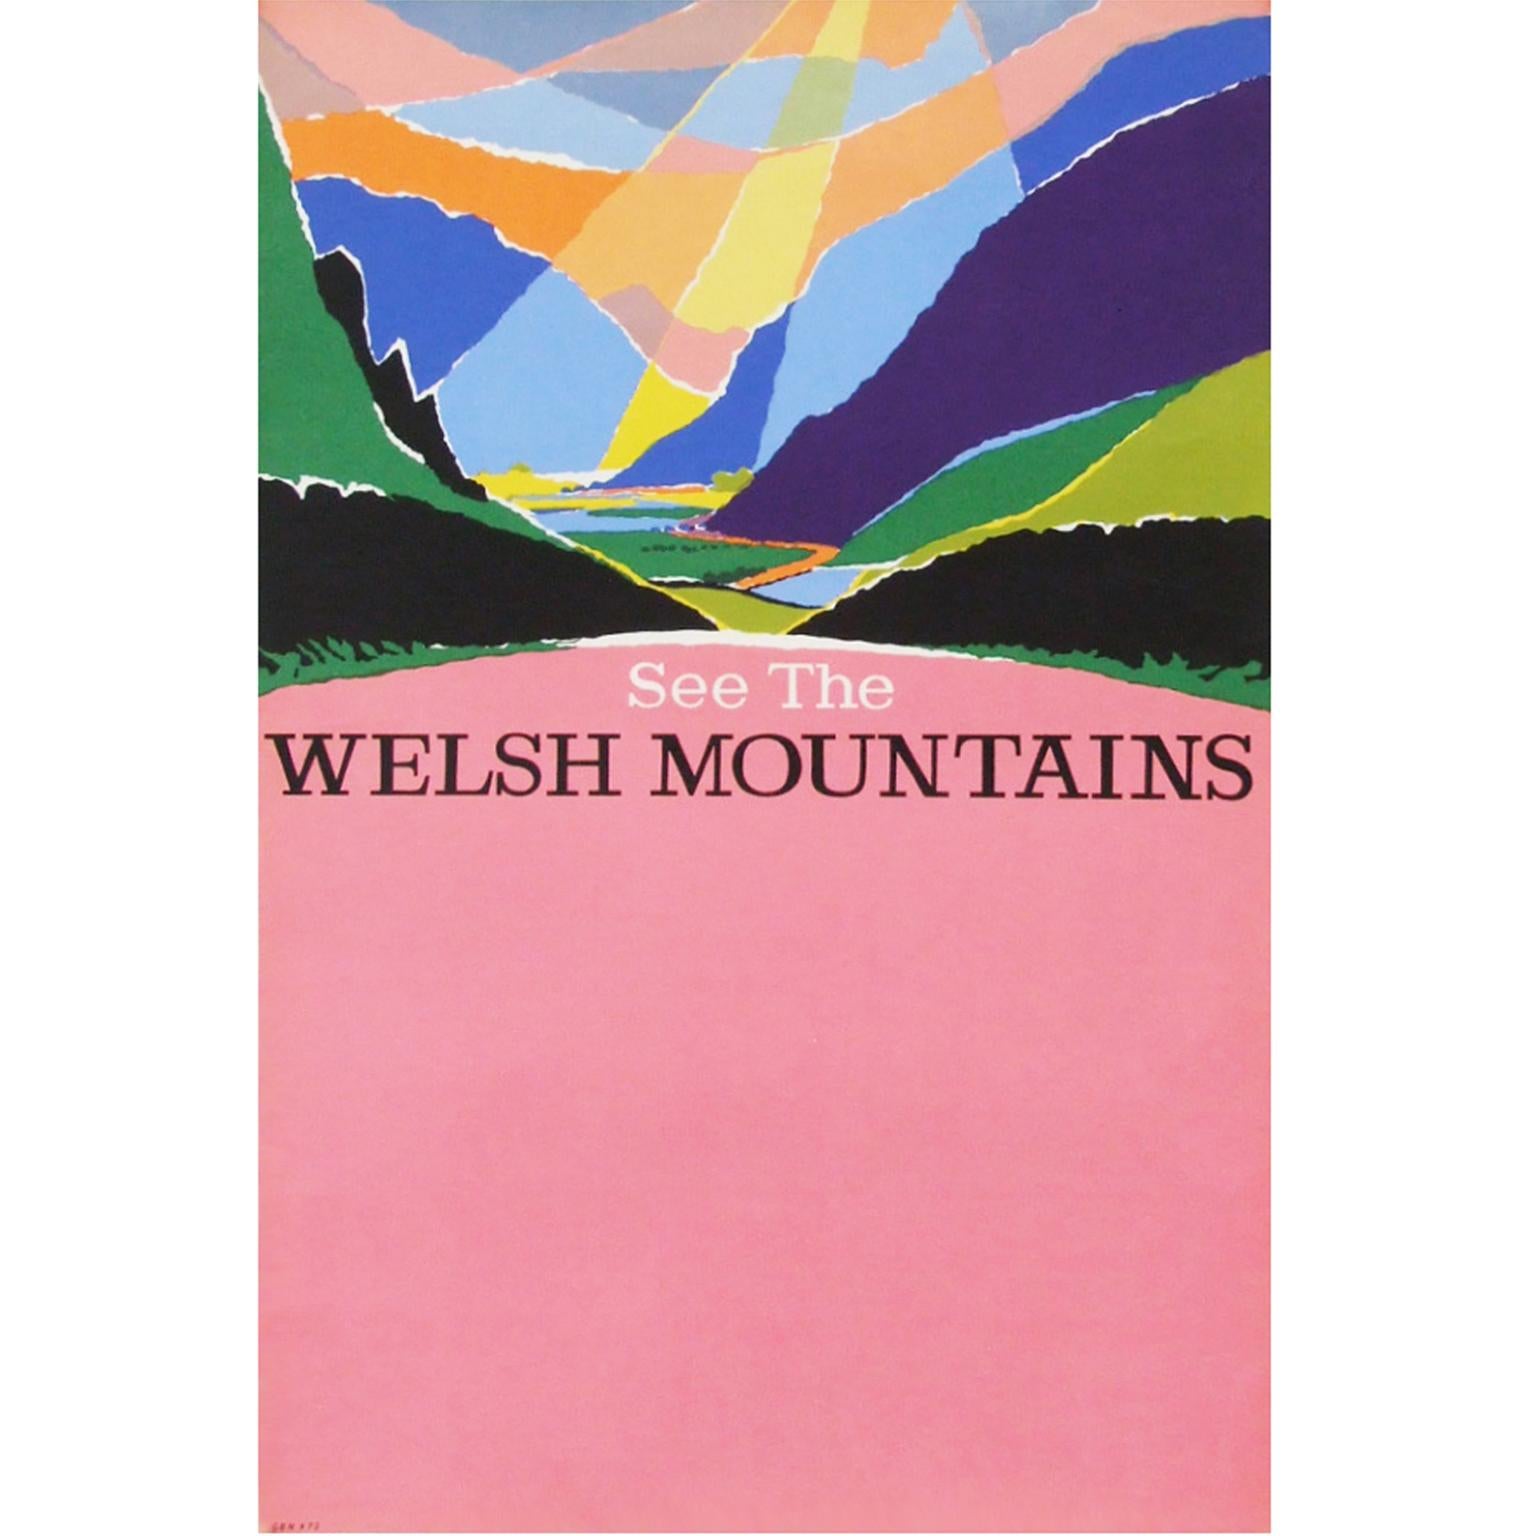 Rare original 1960s promotional travel poster designed by Harry Stevens for British transport, UK.

First edition color offset lithograph.

Rolled.

   